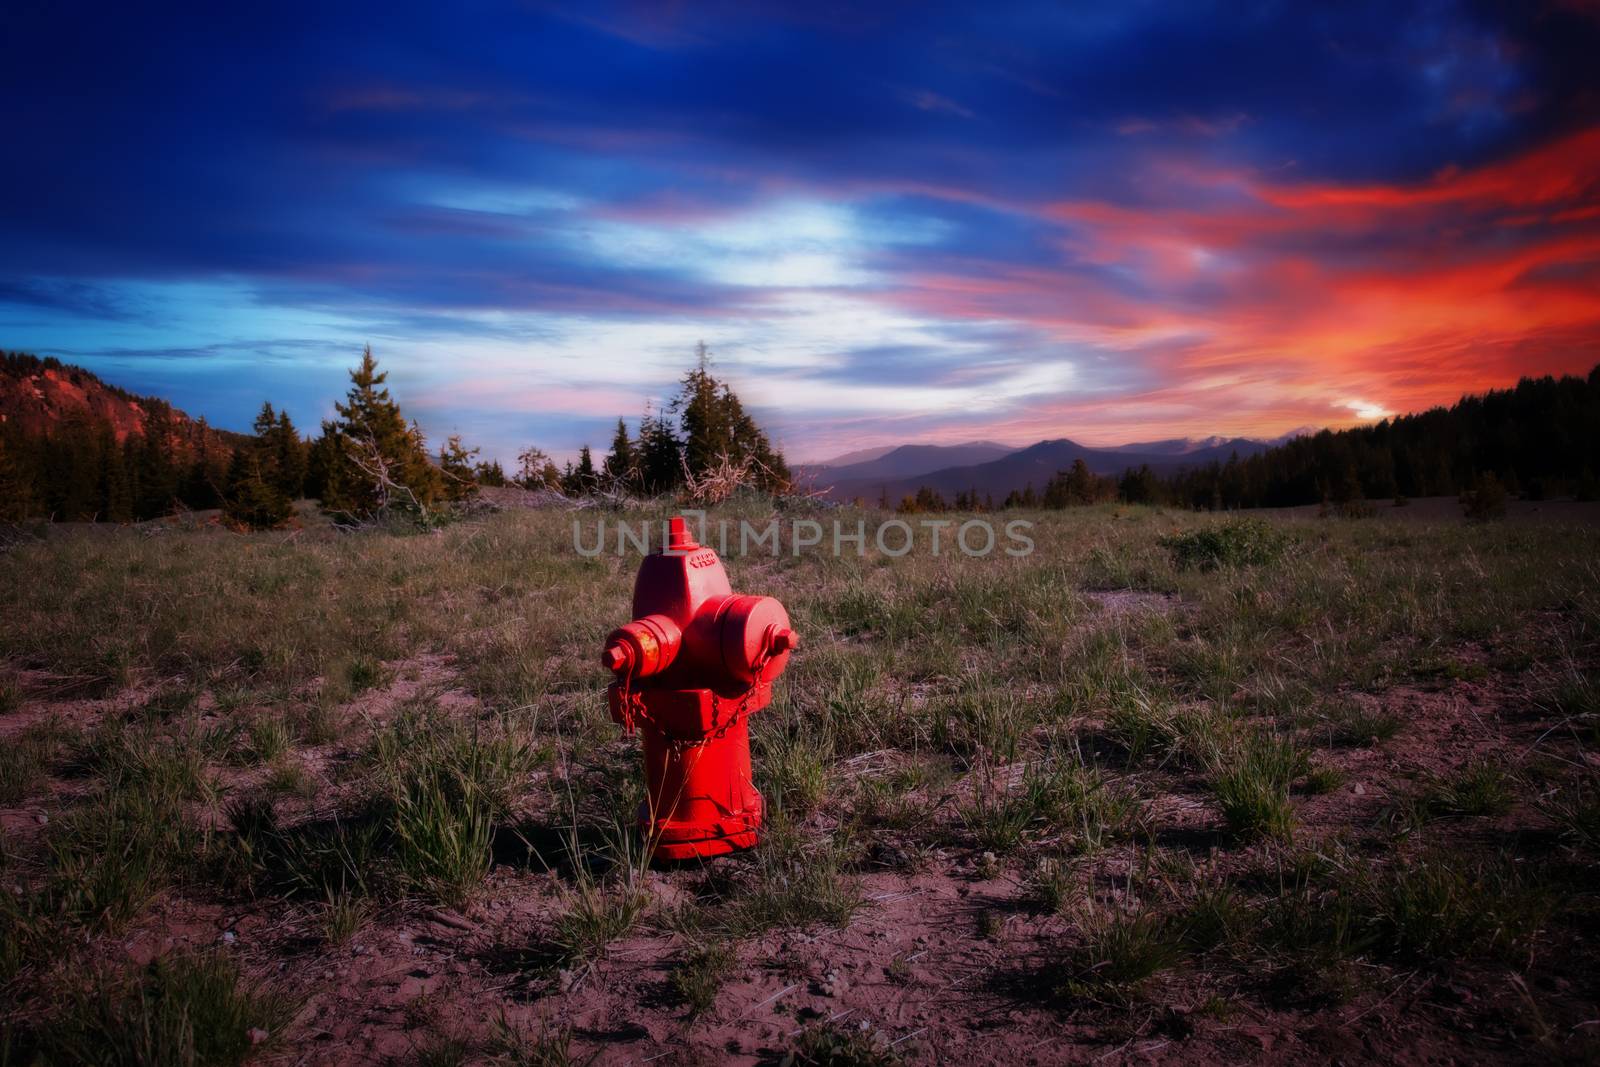 A red fire hydrant in the middle of a field with a colorful sunset in the background.